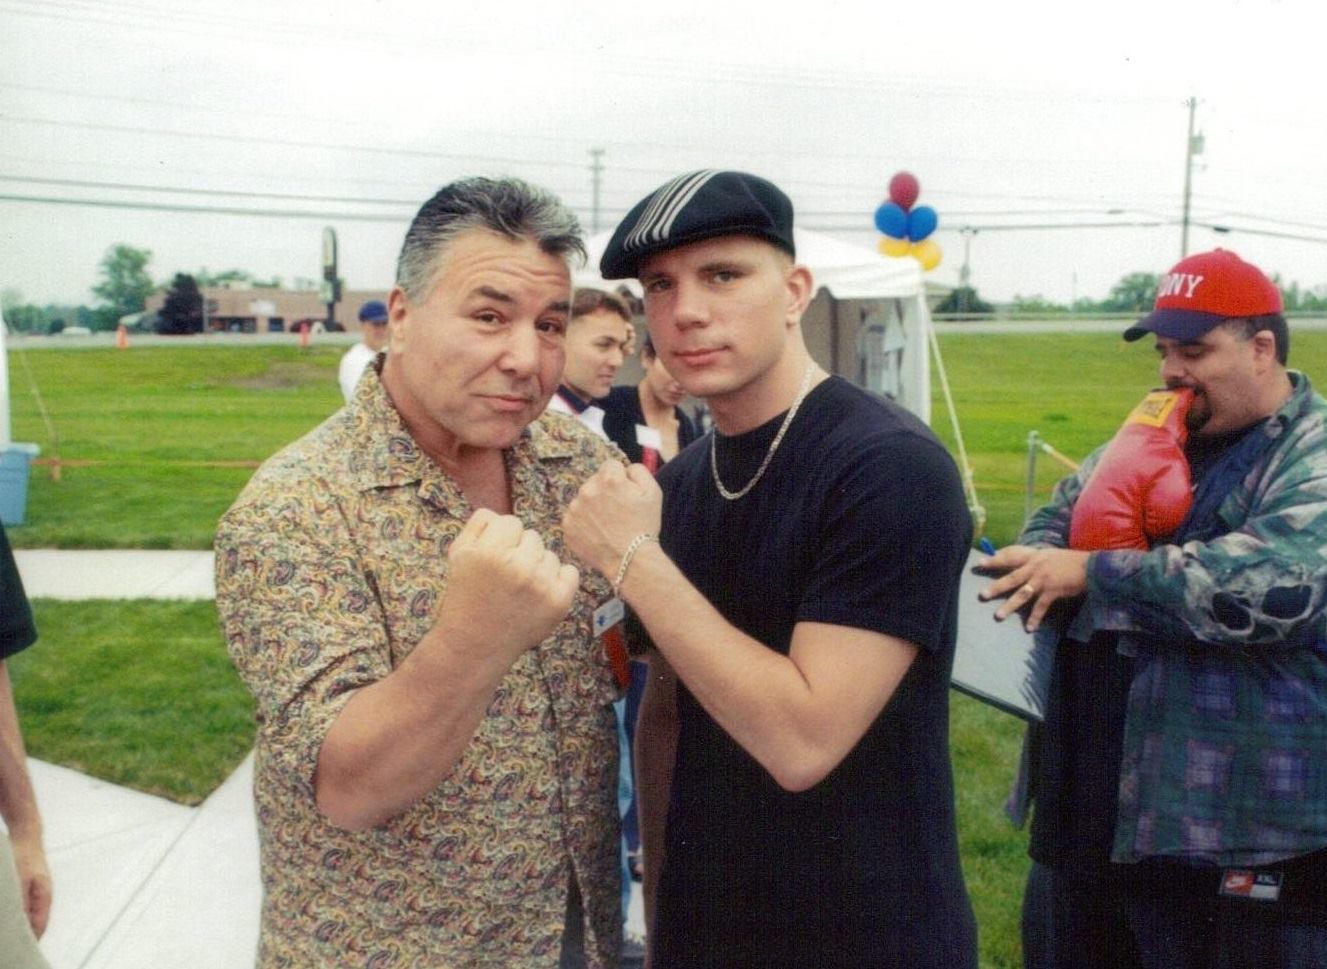 The USA Boxing News Writer/Reporter Kirk Lang with former heavyweight contender George Chuvalo